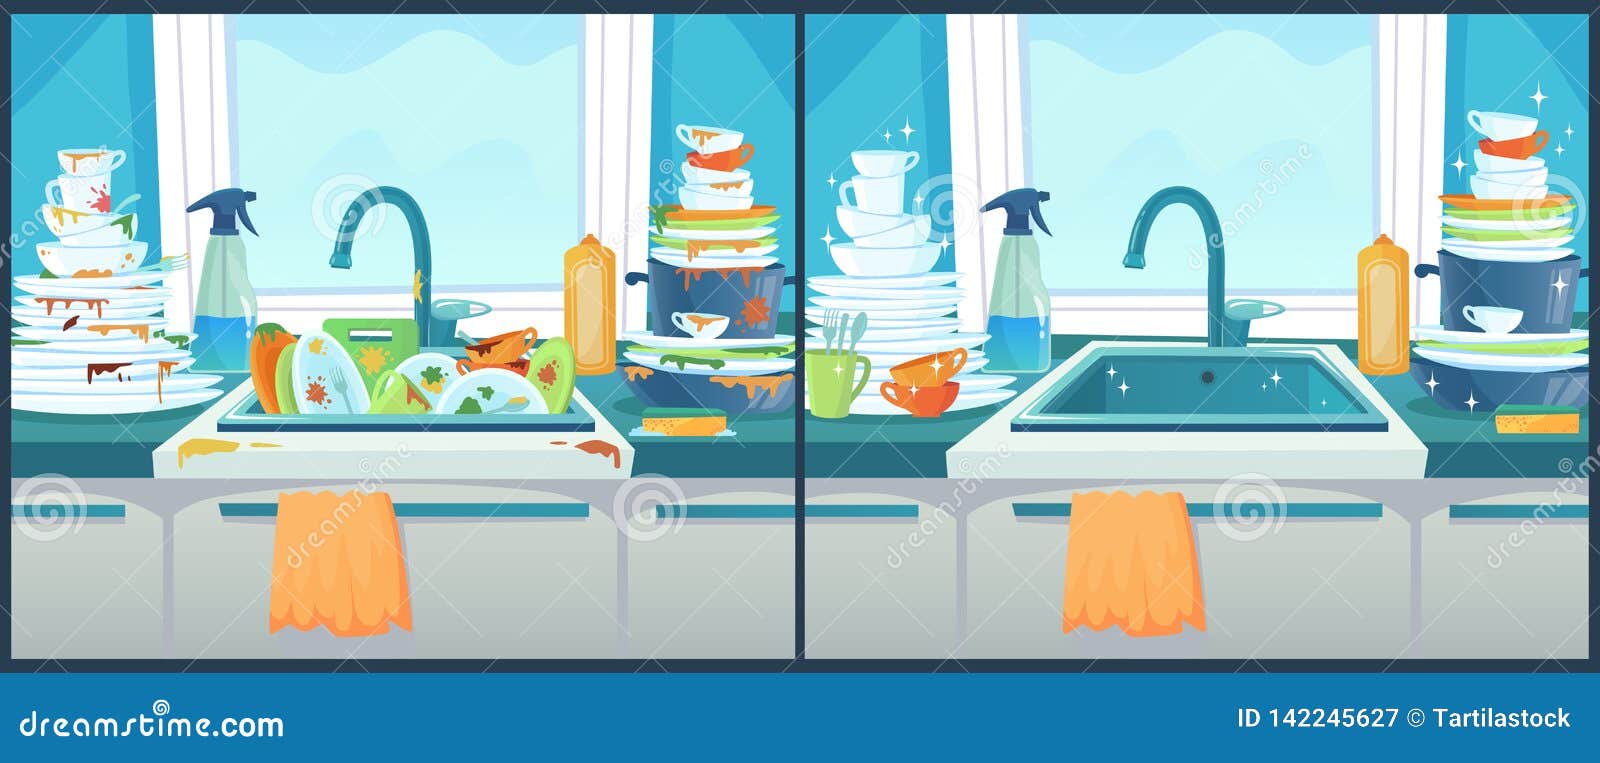 https://thumbs.dreamstime.com/z/washing-dishes-sink-dirty-dish-kitchen-clean-plates-messy-dinnerware-dirt-unwashed-washstand-home-utensil-cartoon-vector-142245627.jpg